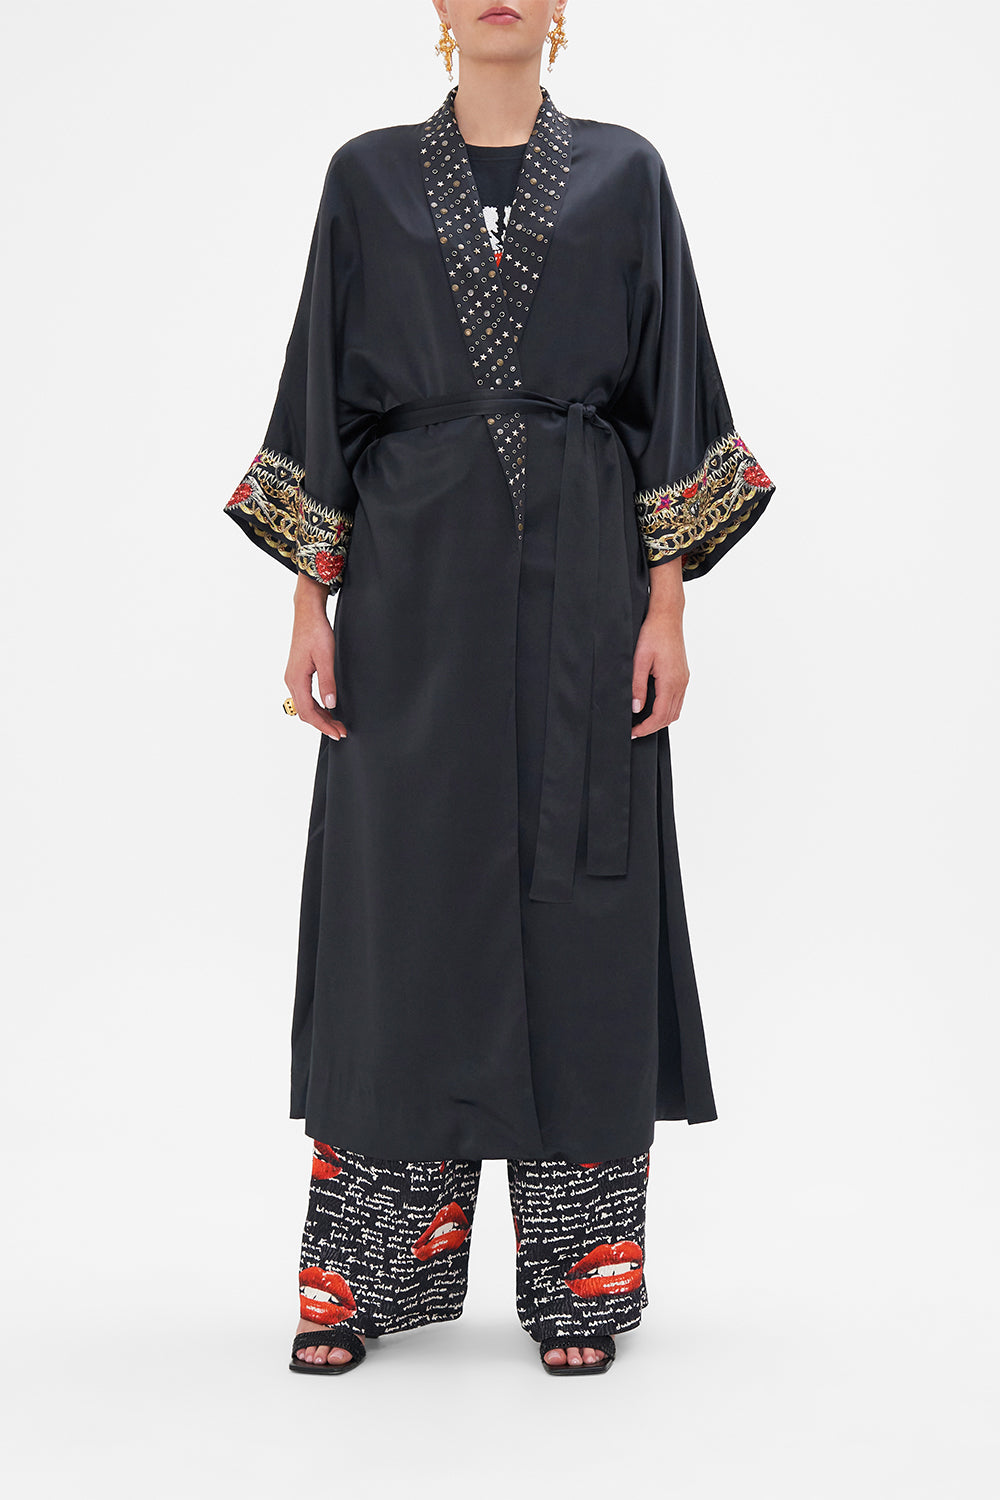 Front closed view of model wearing CAMILLA black silk robe in Radical Rebirth print